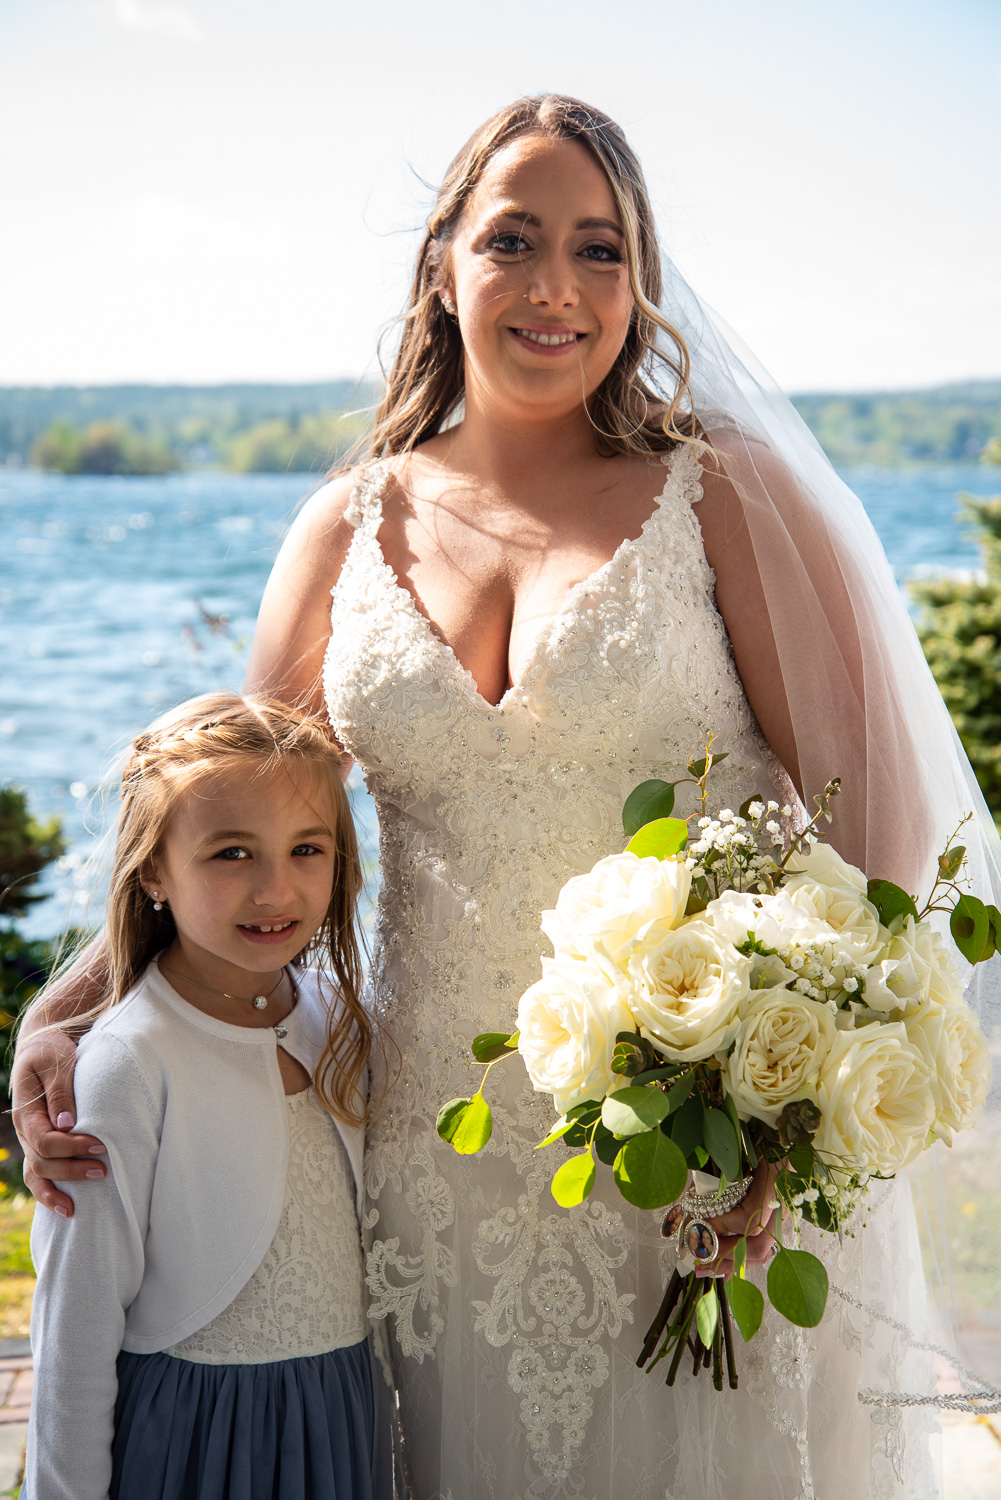 Bride holding bouquet standing with the flower girl after the lakeside wedding